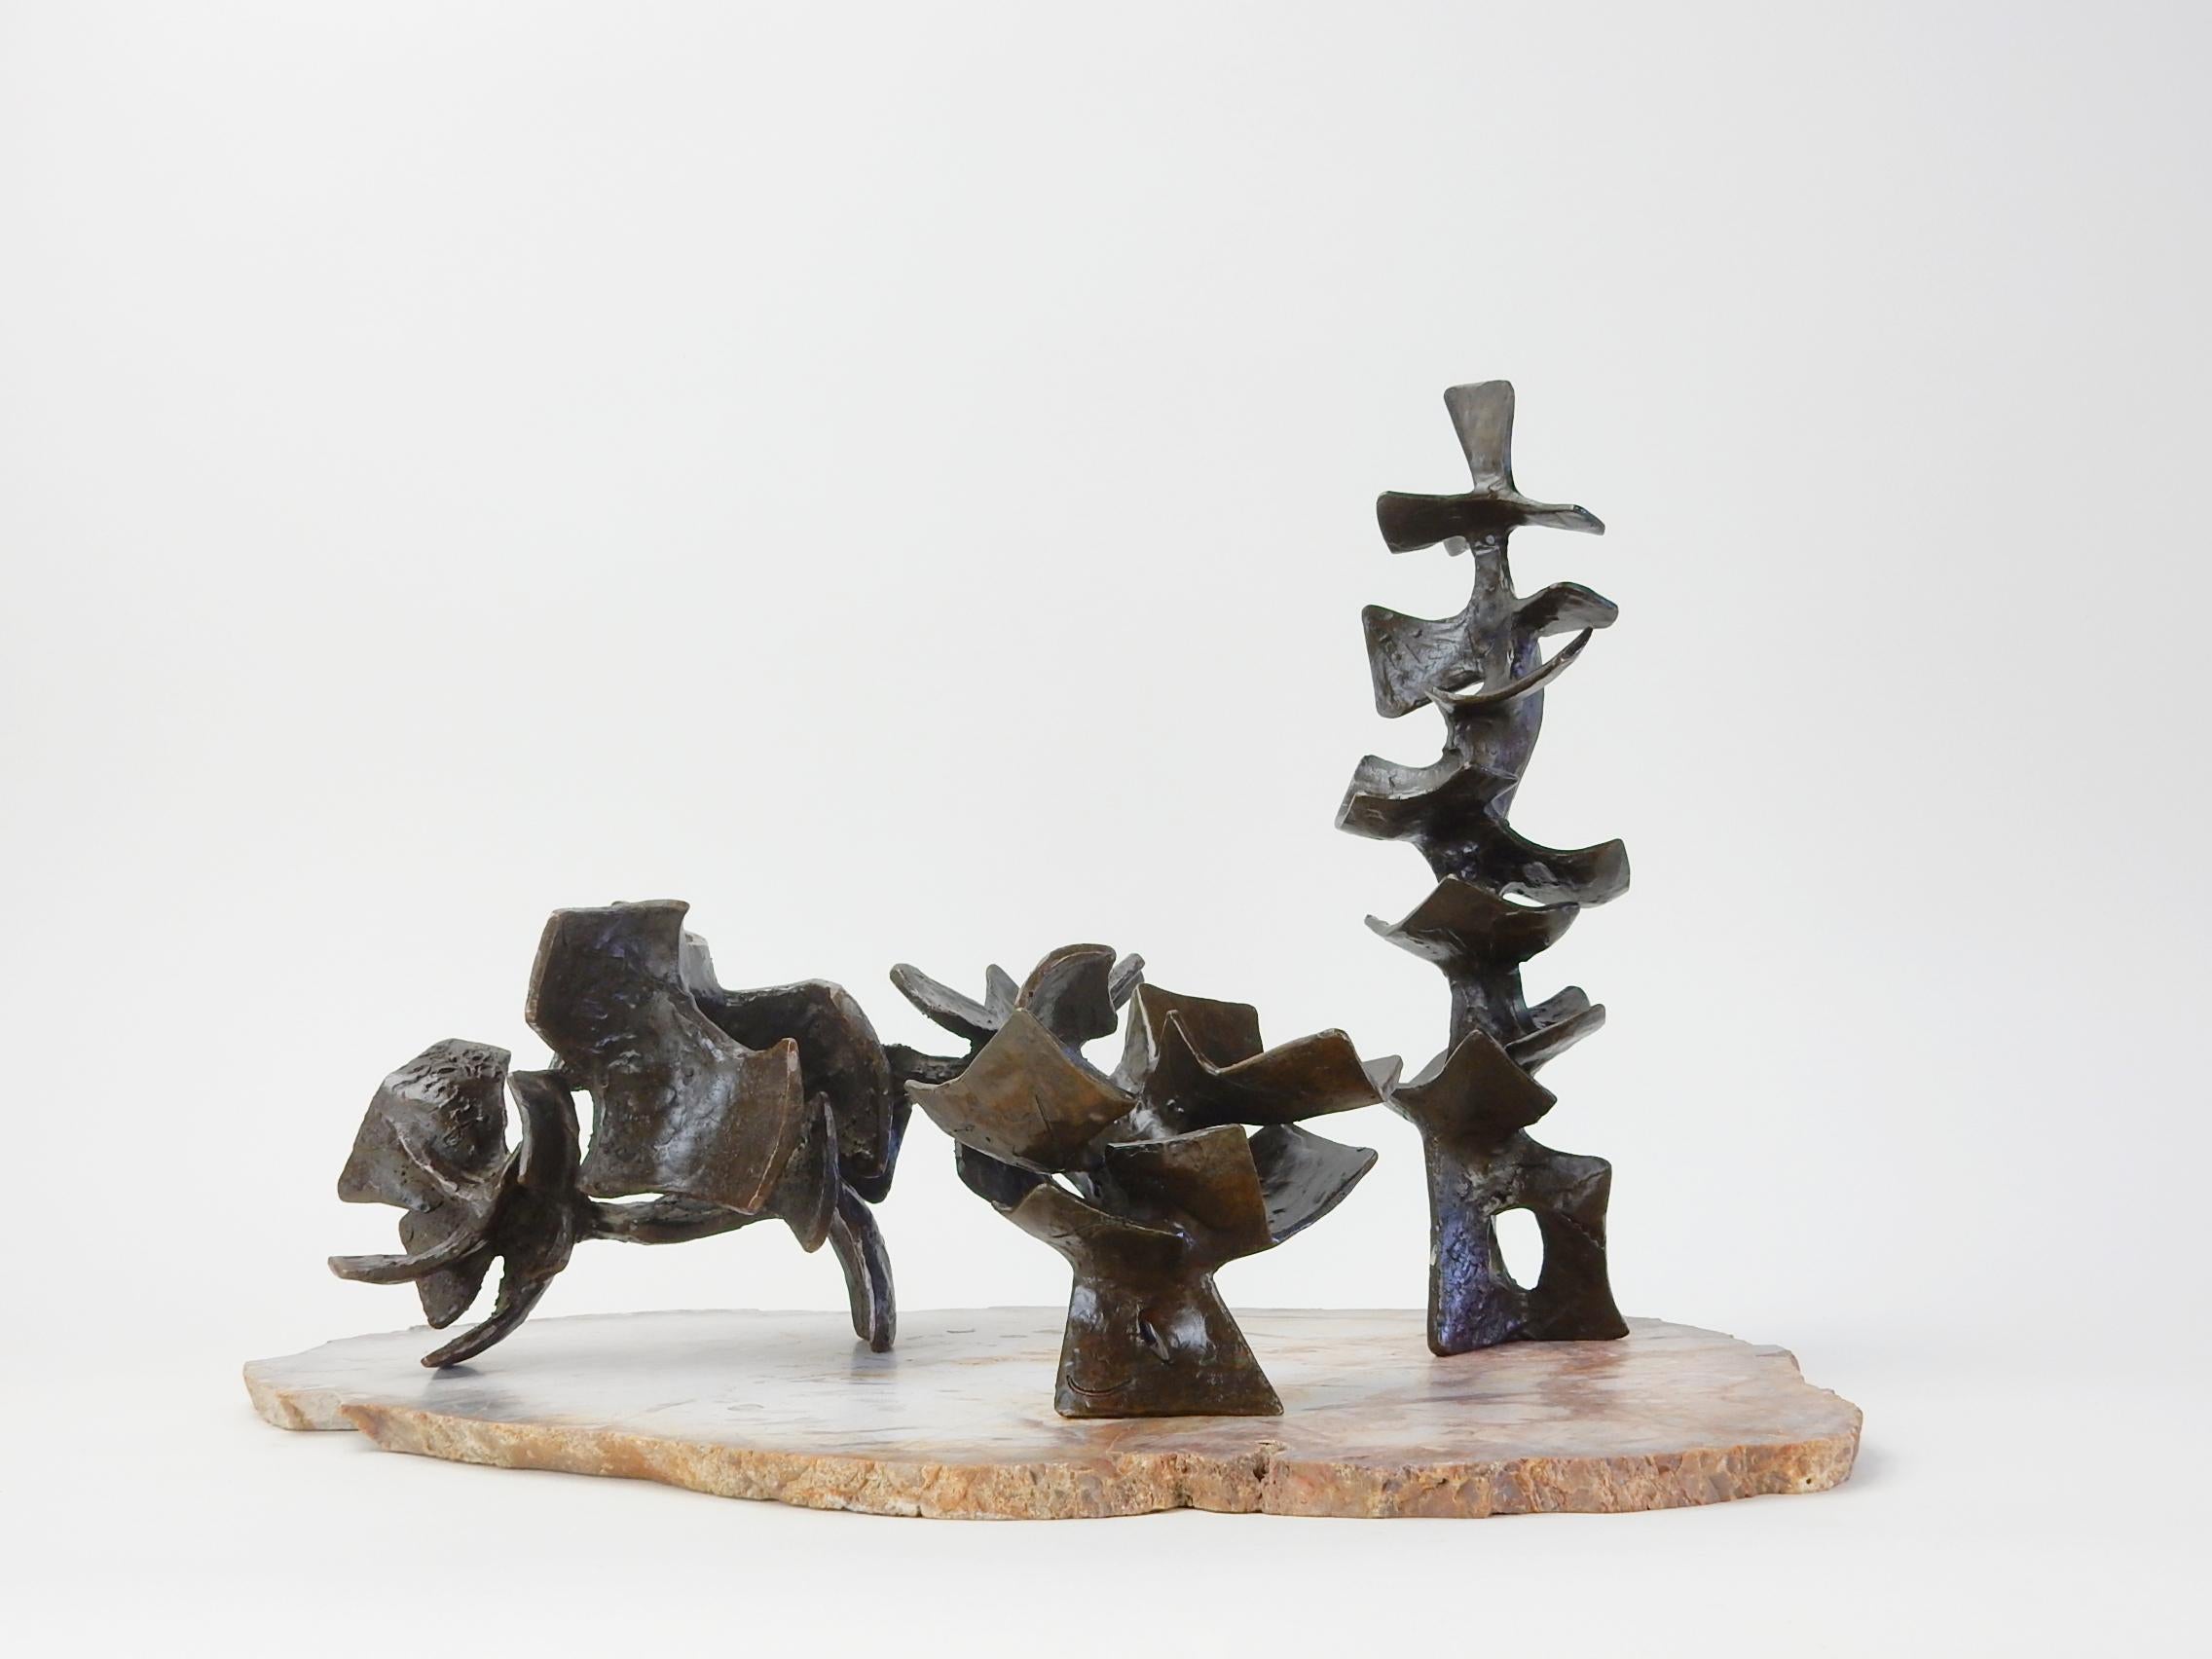 Set of 3 abstract solid bronze sculptures arranged on a thinly sliced petrified palm root slate.
Organic shapes in the style of sculptor Henry Moore.
Each is signed G. W. Hall and dated 1958 and 1959.
Tallest is 13 inches tall.

     